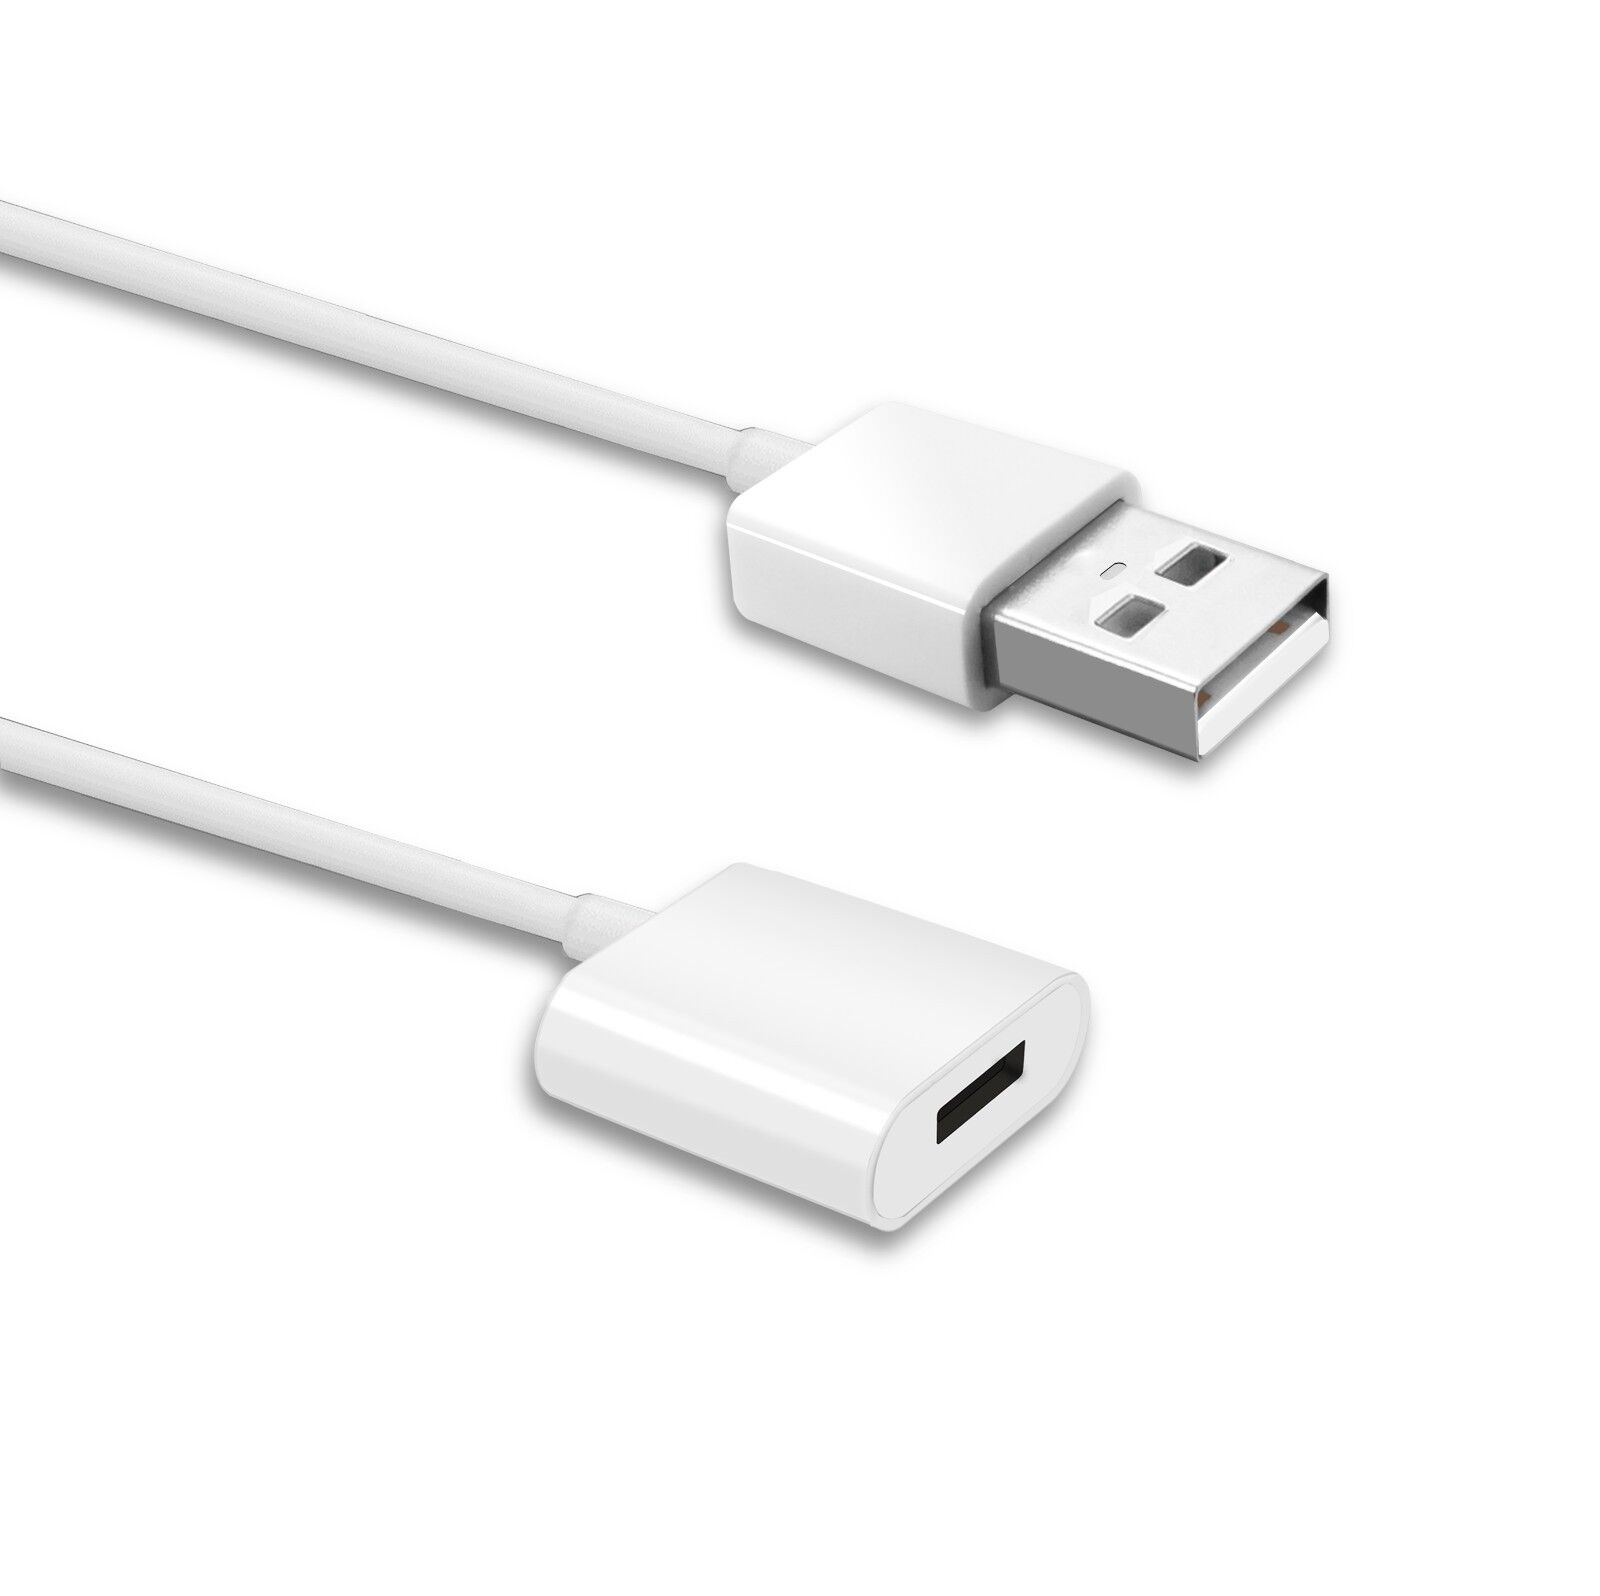 TechMatte Apple Pencil Male to Female Flexible Charging Cable (3 Feet, White)